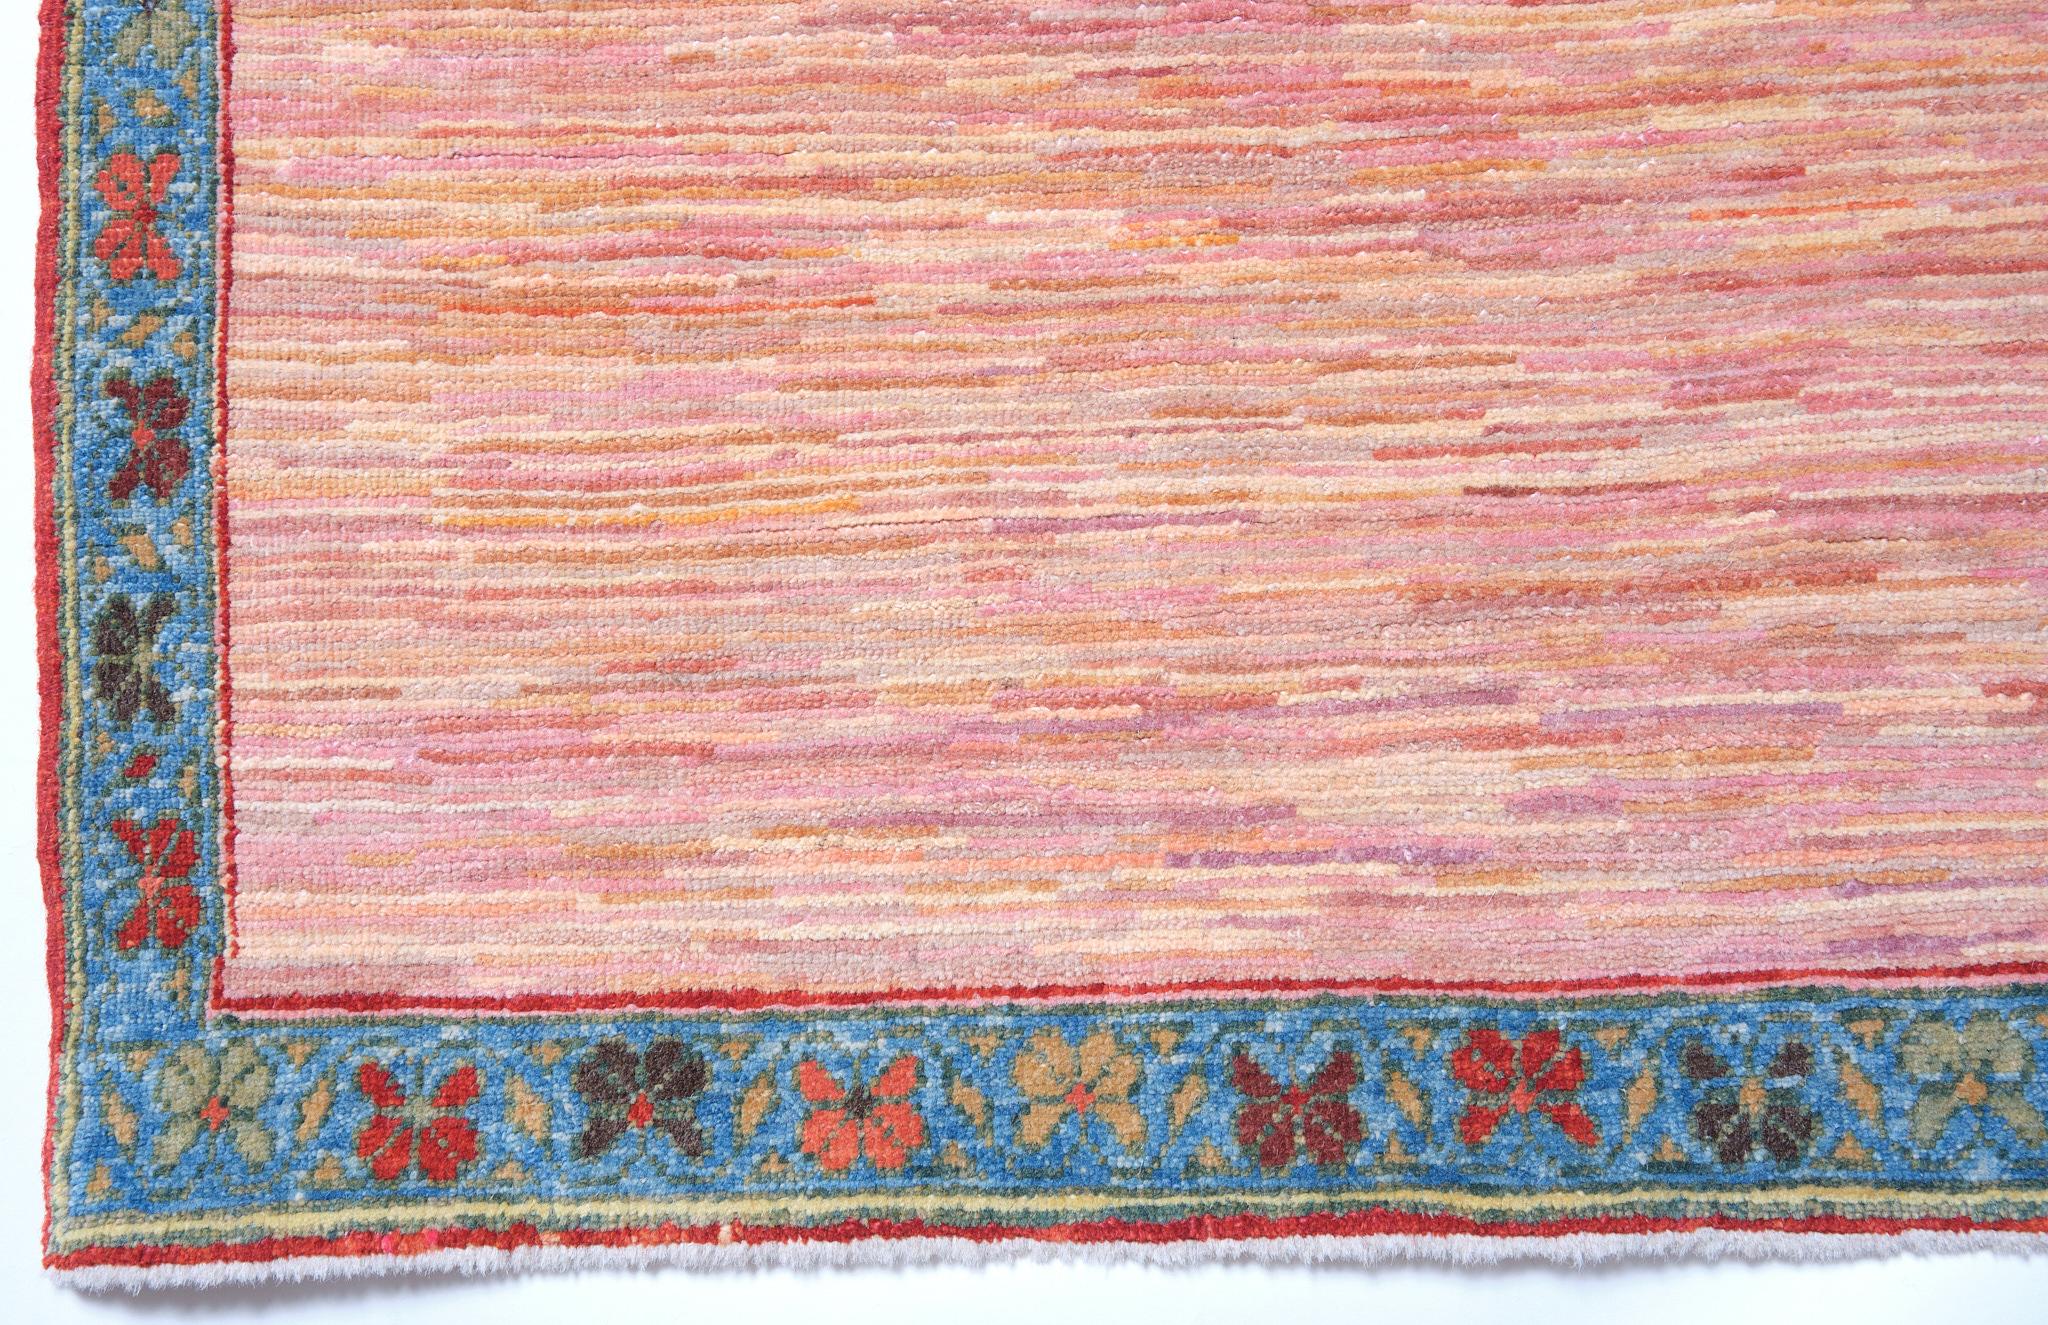 This unique design rug is interpreted by our designers with a mixture of Ararat Rugs’ soft tone natural dyed hand-spun yarns.

Color summary: 10 colors in total, most used 4 colors are;
Mixture of Our Pink Colors
Russian Green 418 (Henna –